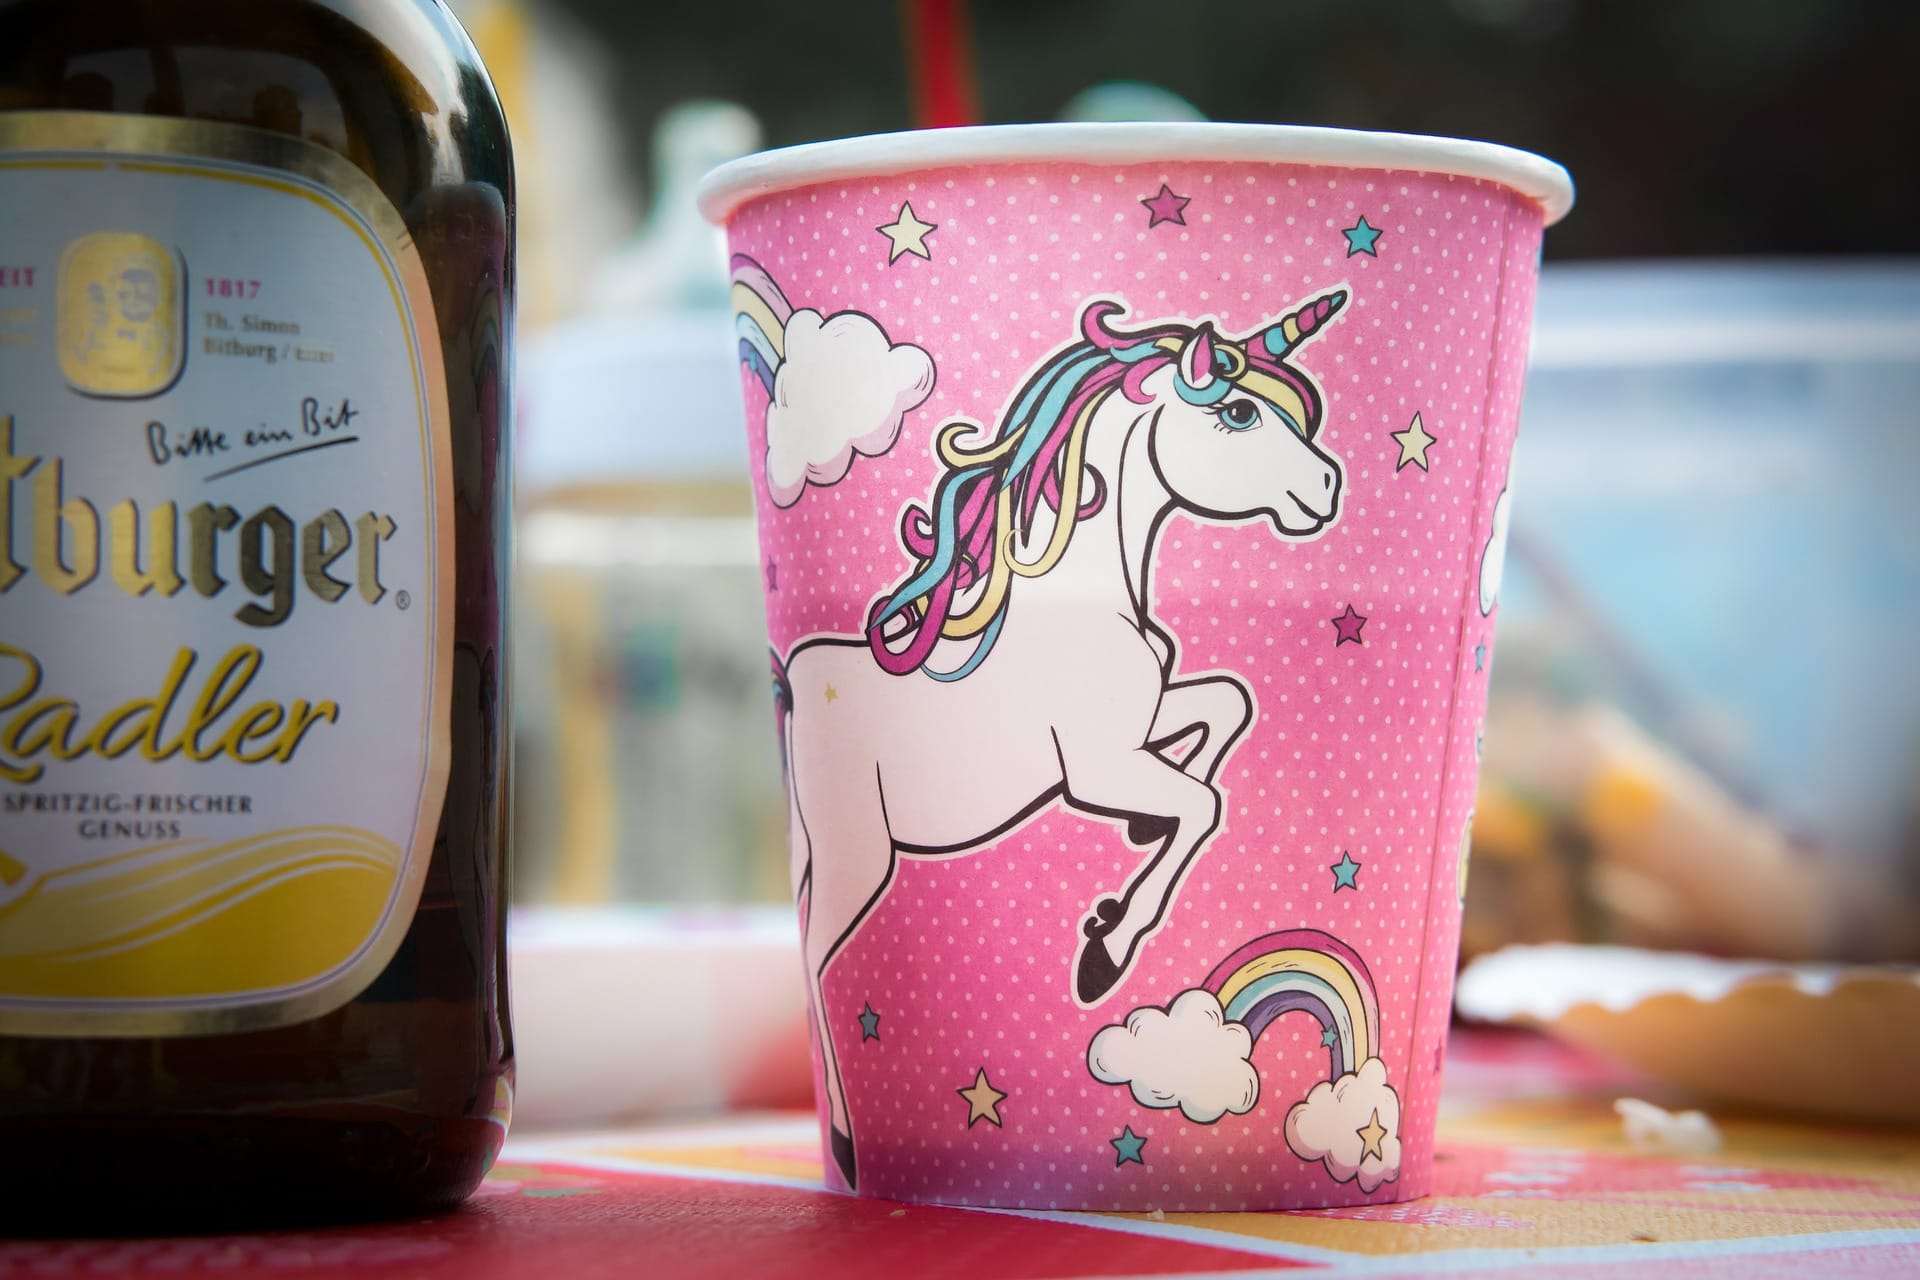 Unicorn image on a cup